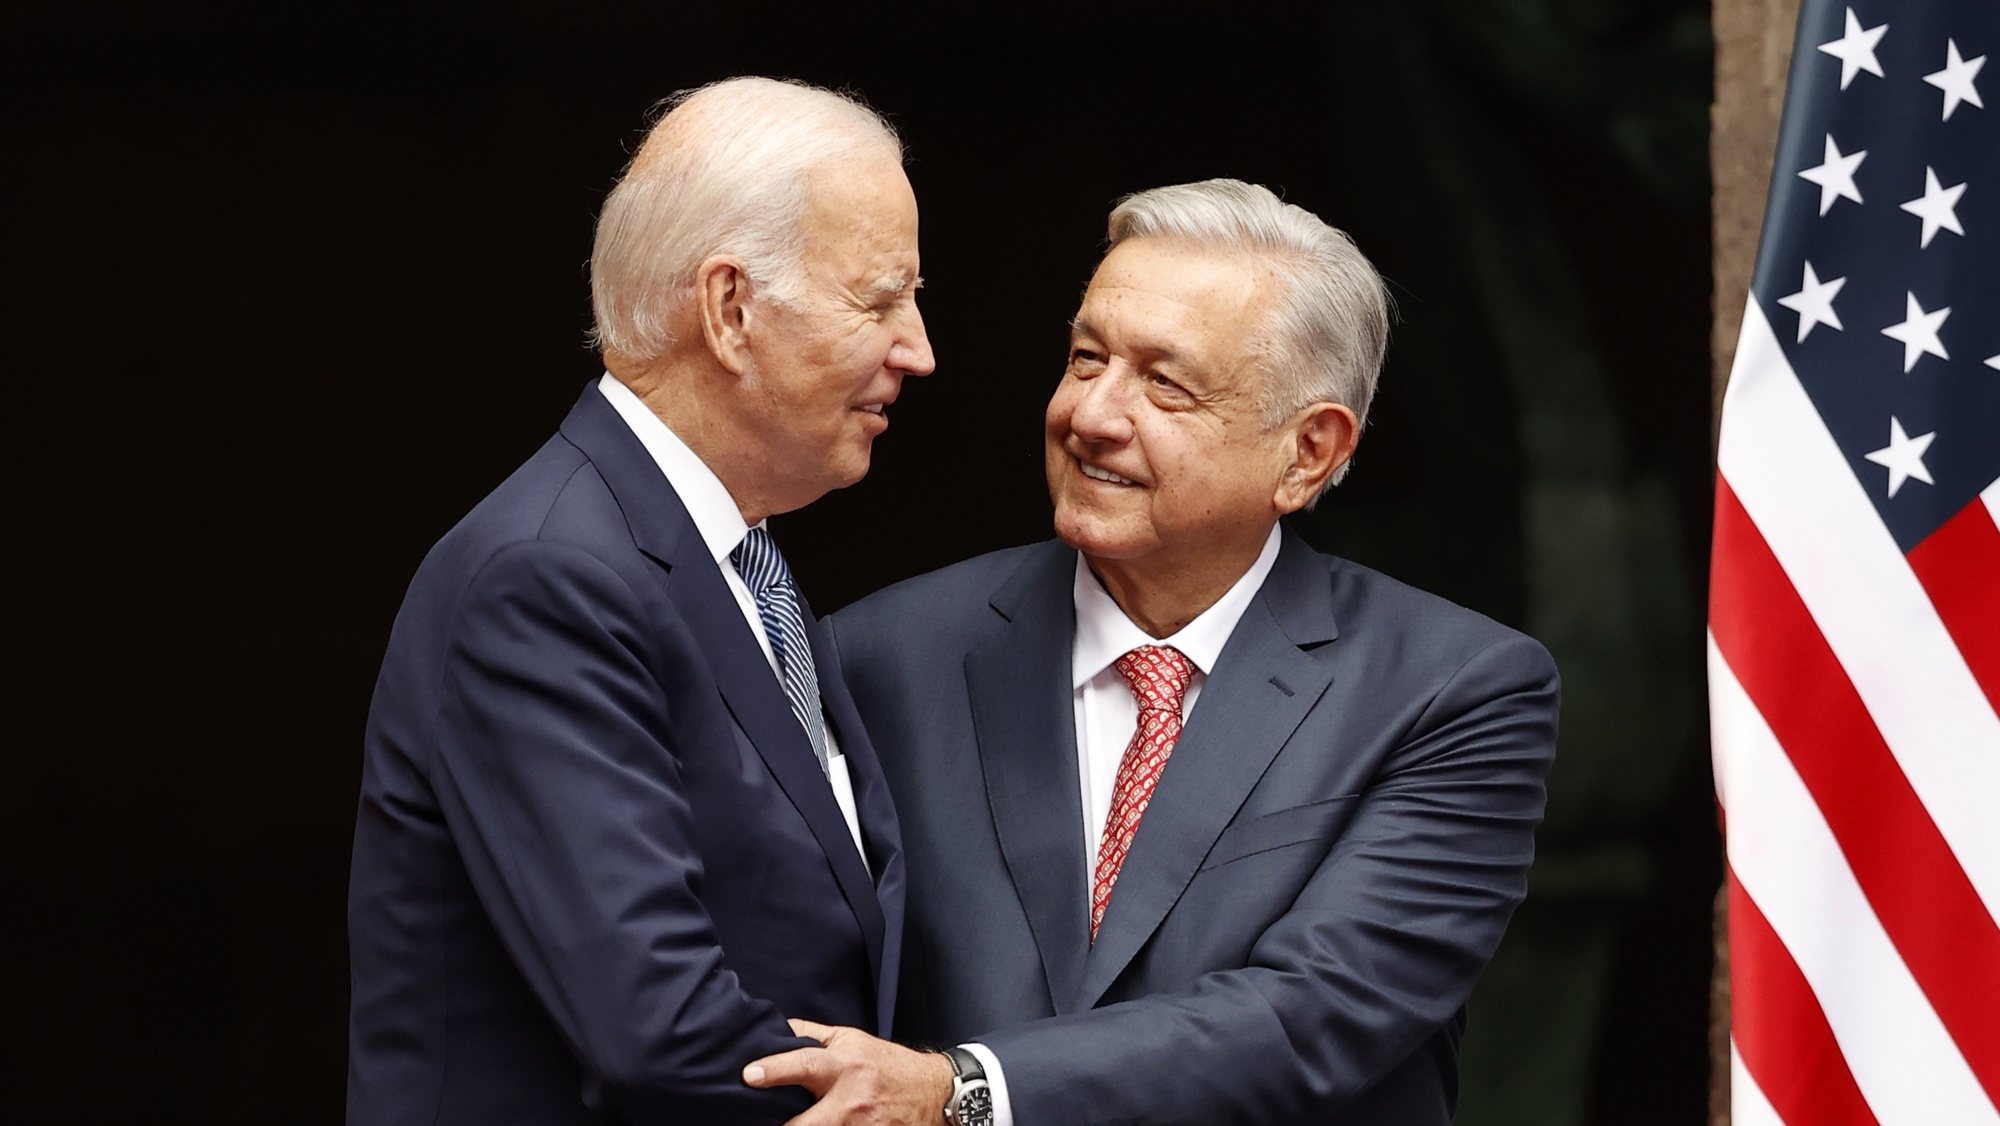 epa10397370 US President Joe Biden (L) and President of Mexico Andres Manuel Lopez Obrador pose at the National Palace in Mexico City, Mexico, 09 January 2023. Biden and Obrador will participate in the North American Leaders Summit with Canadian Prime Minister Justin Trudeau.  EPA/Jose Mendez